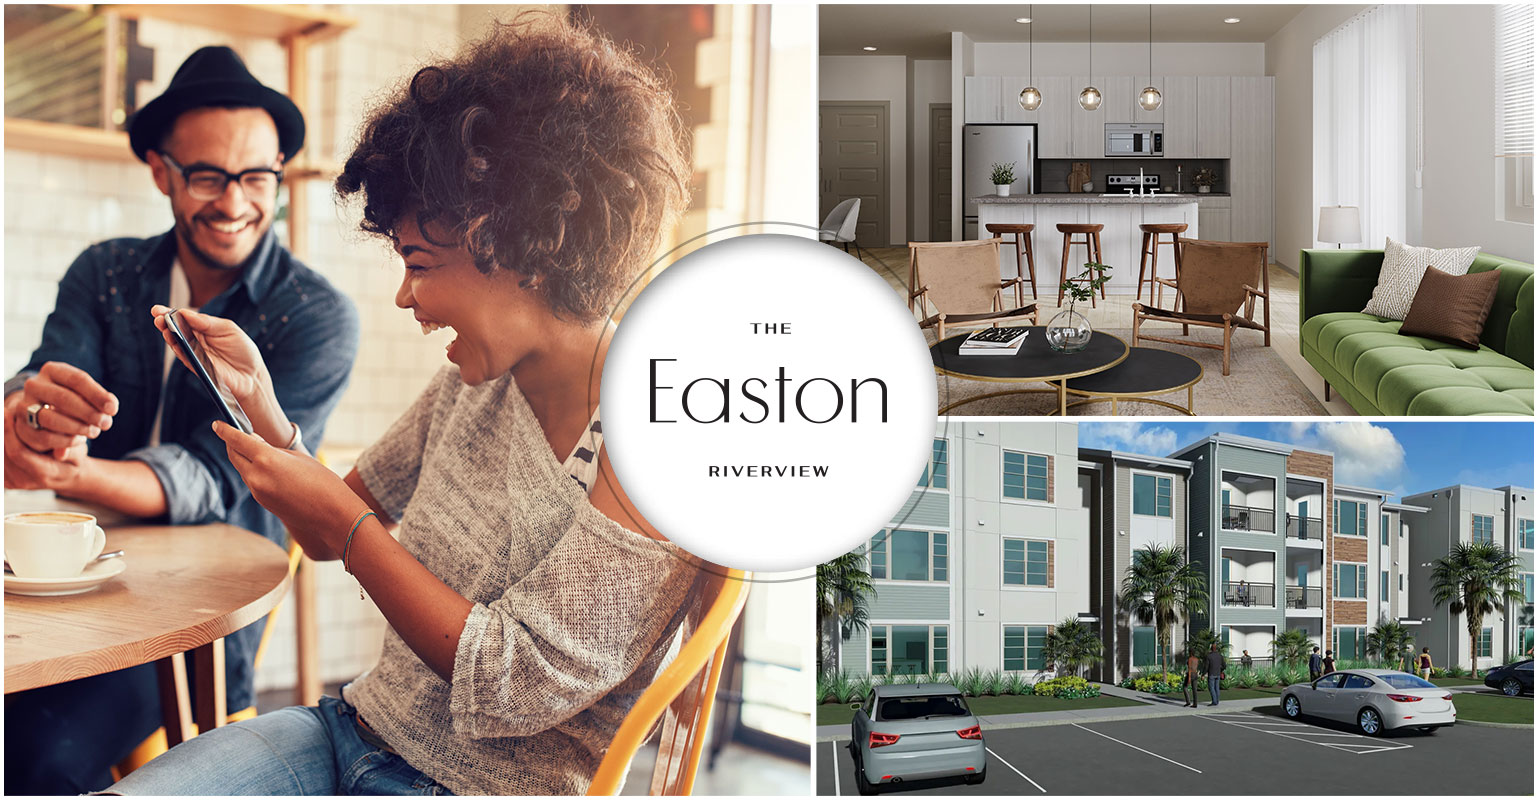 The Easton Riverview